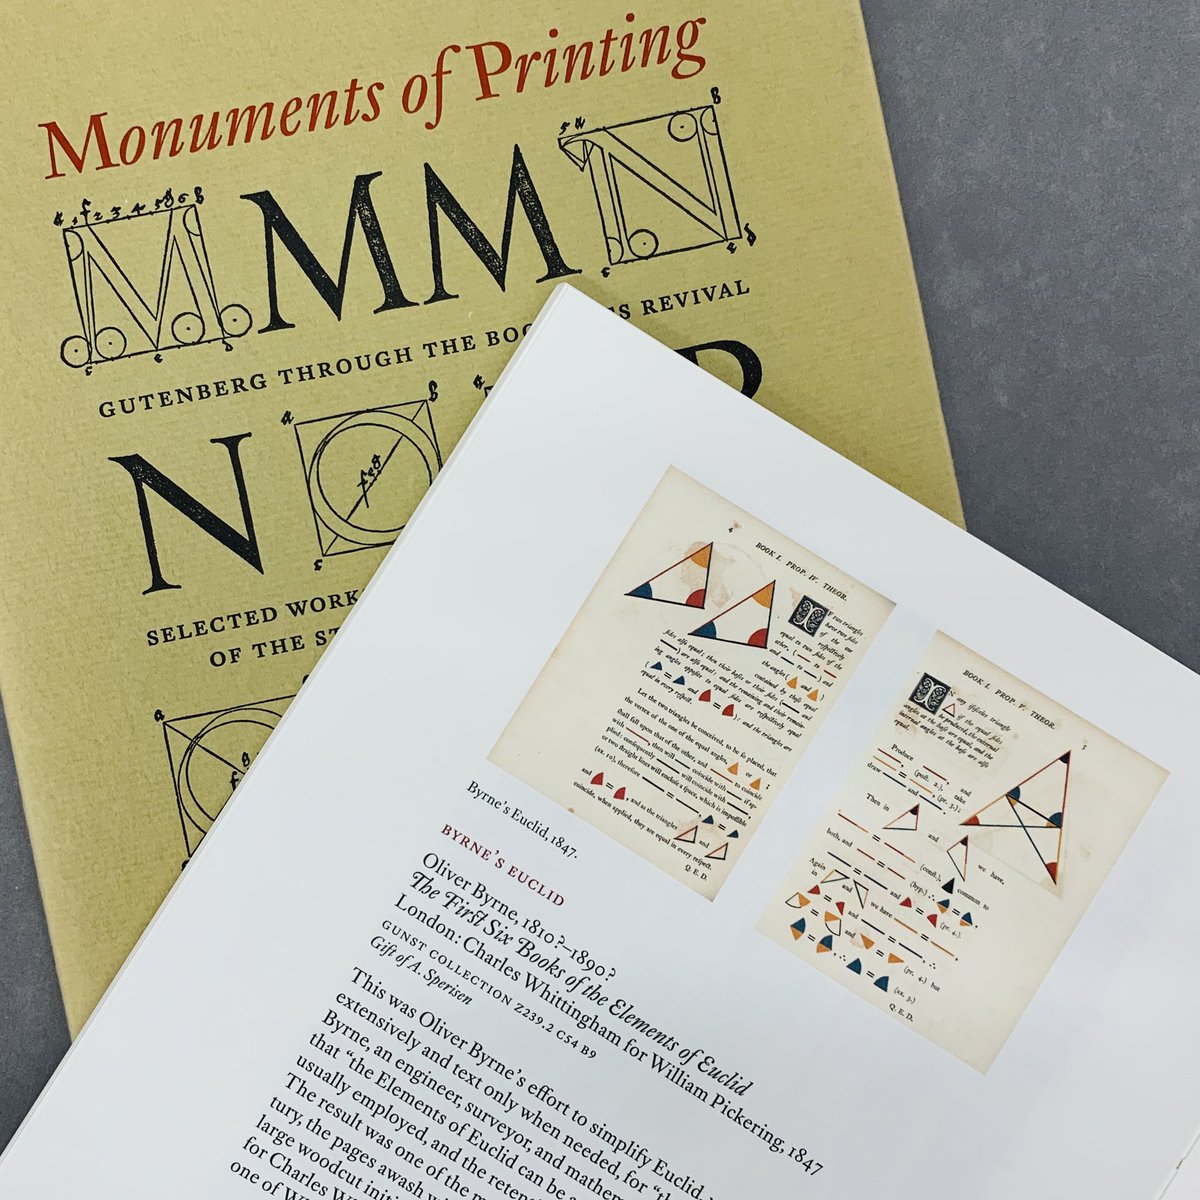 When Byrne is considered a “Monument of Printing”… Monuments of Printing, Gutenberg Through the Book Arts Revival: Selected Works in the Rare Book Collections of the Stanford University Libraries (John E. Mustain, 2013) #bookexhibition #bookexhibit #artexhibition #artexhibit